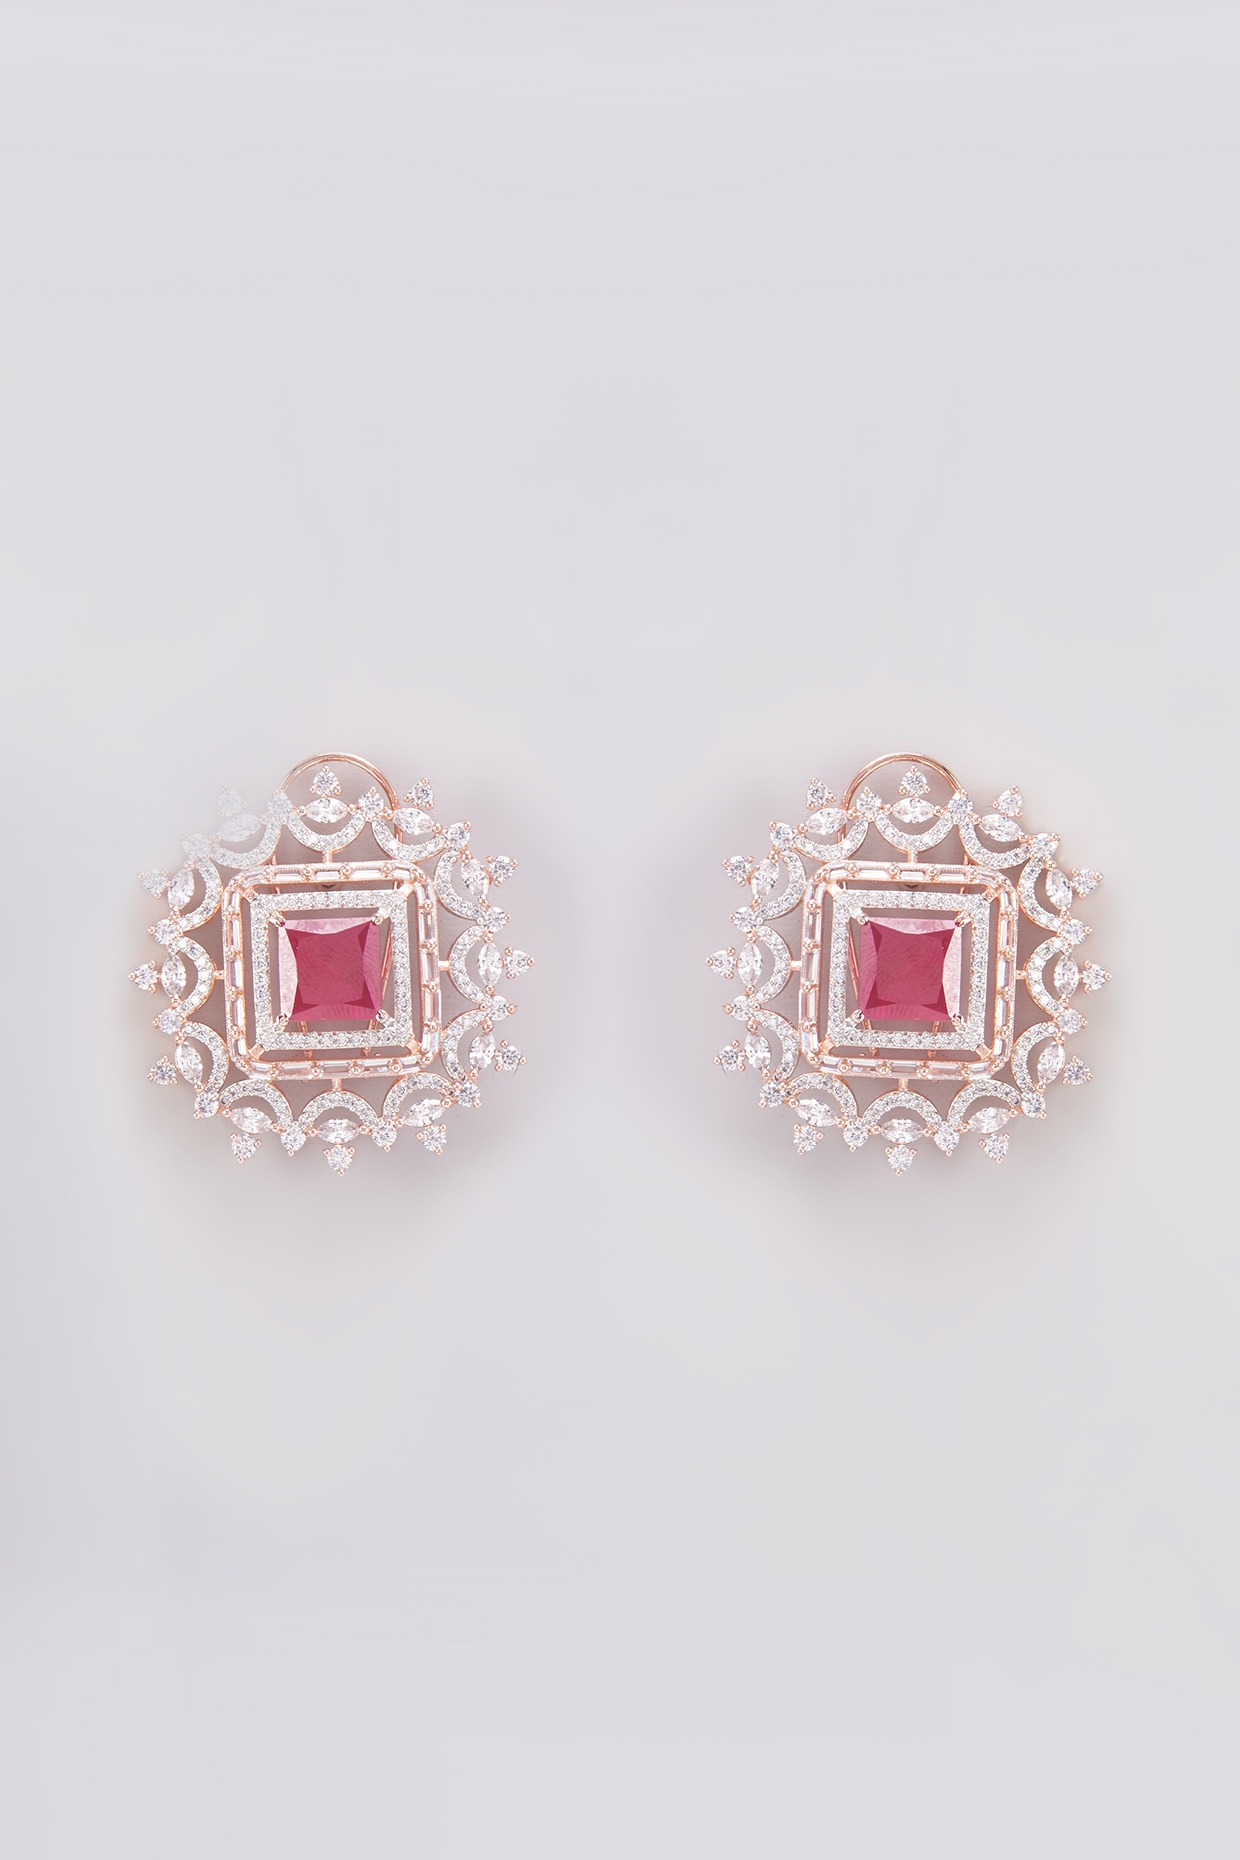 Red Round Ruby Studs Earrings at Rs 3200/pair in Jaipur | ID: 2852515929230